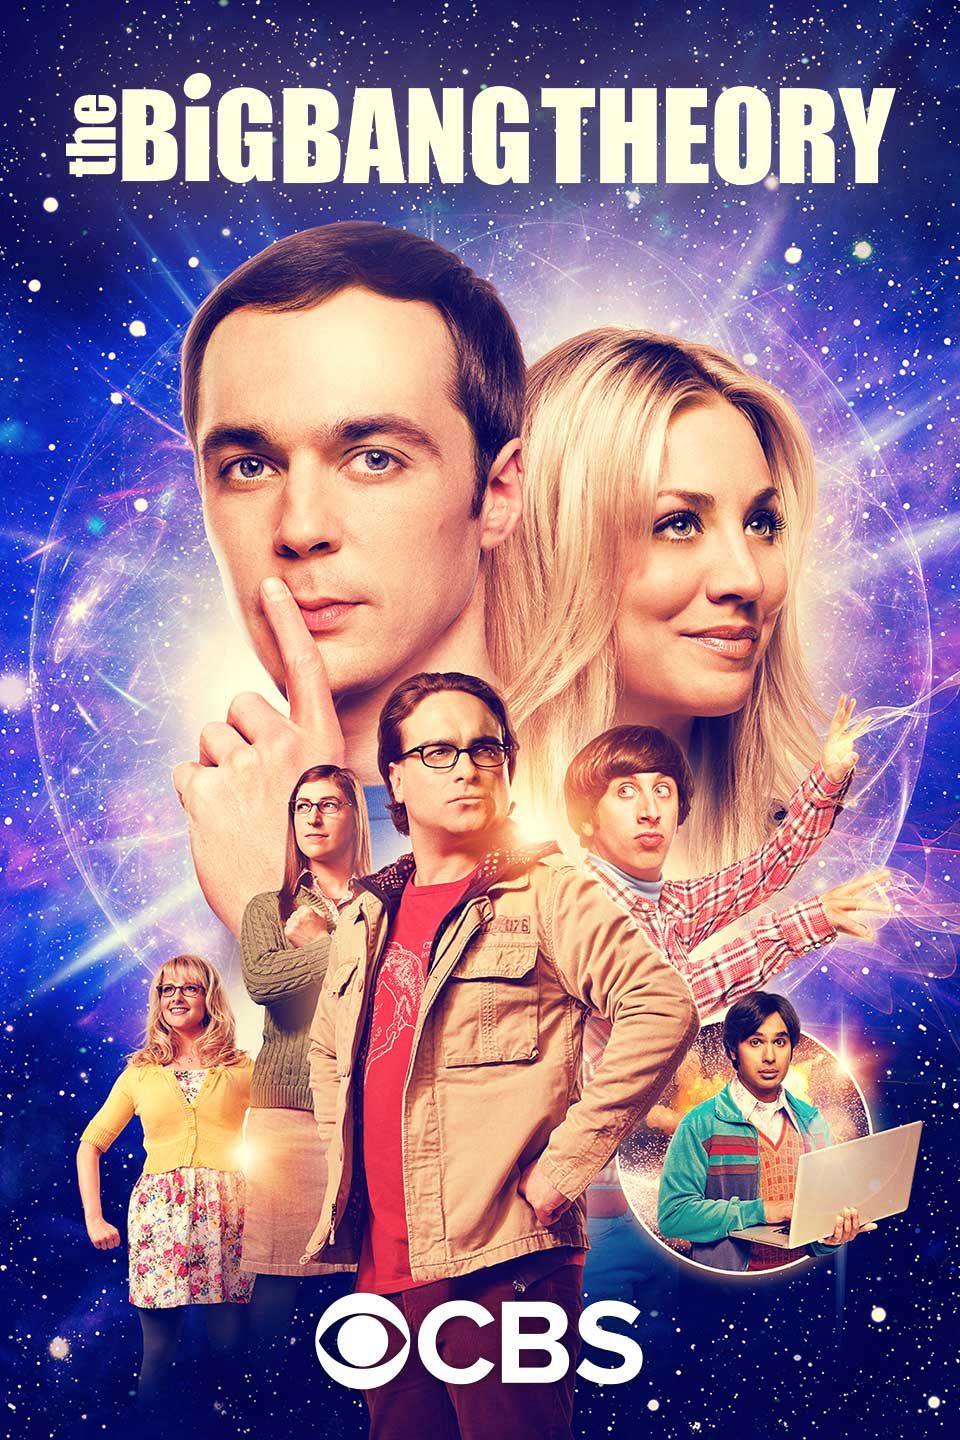 The Big Bang Theory Poster with Penny and Sheldon at the center and the rest of the cast in various poses.